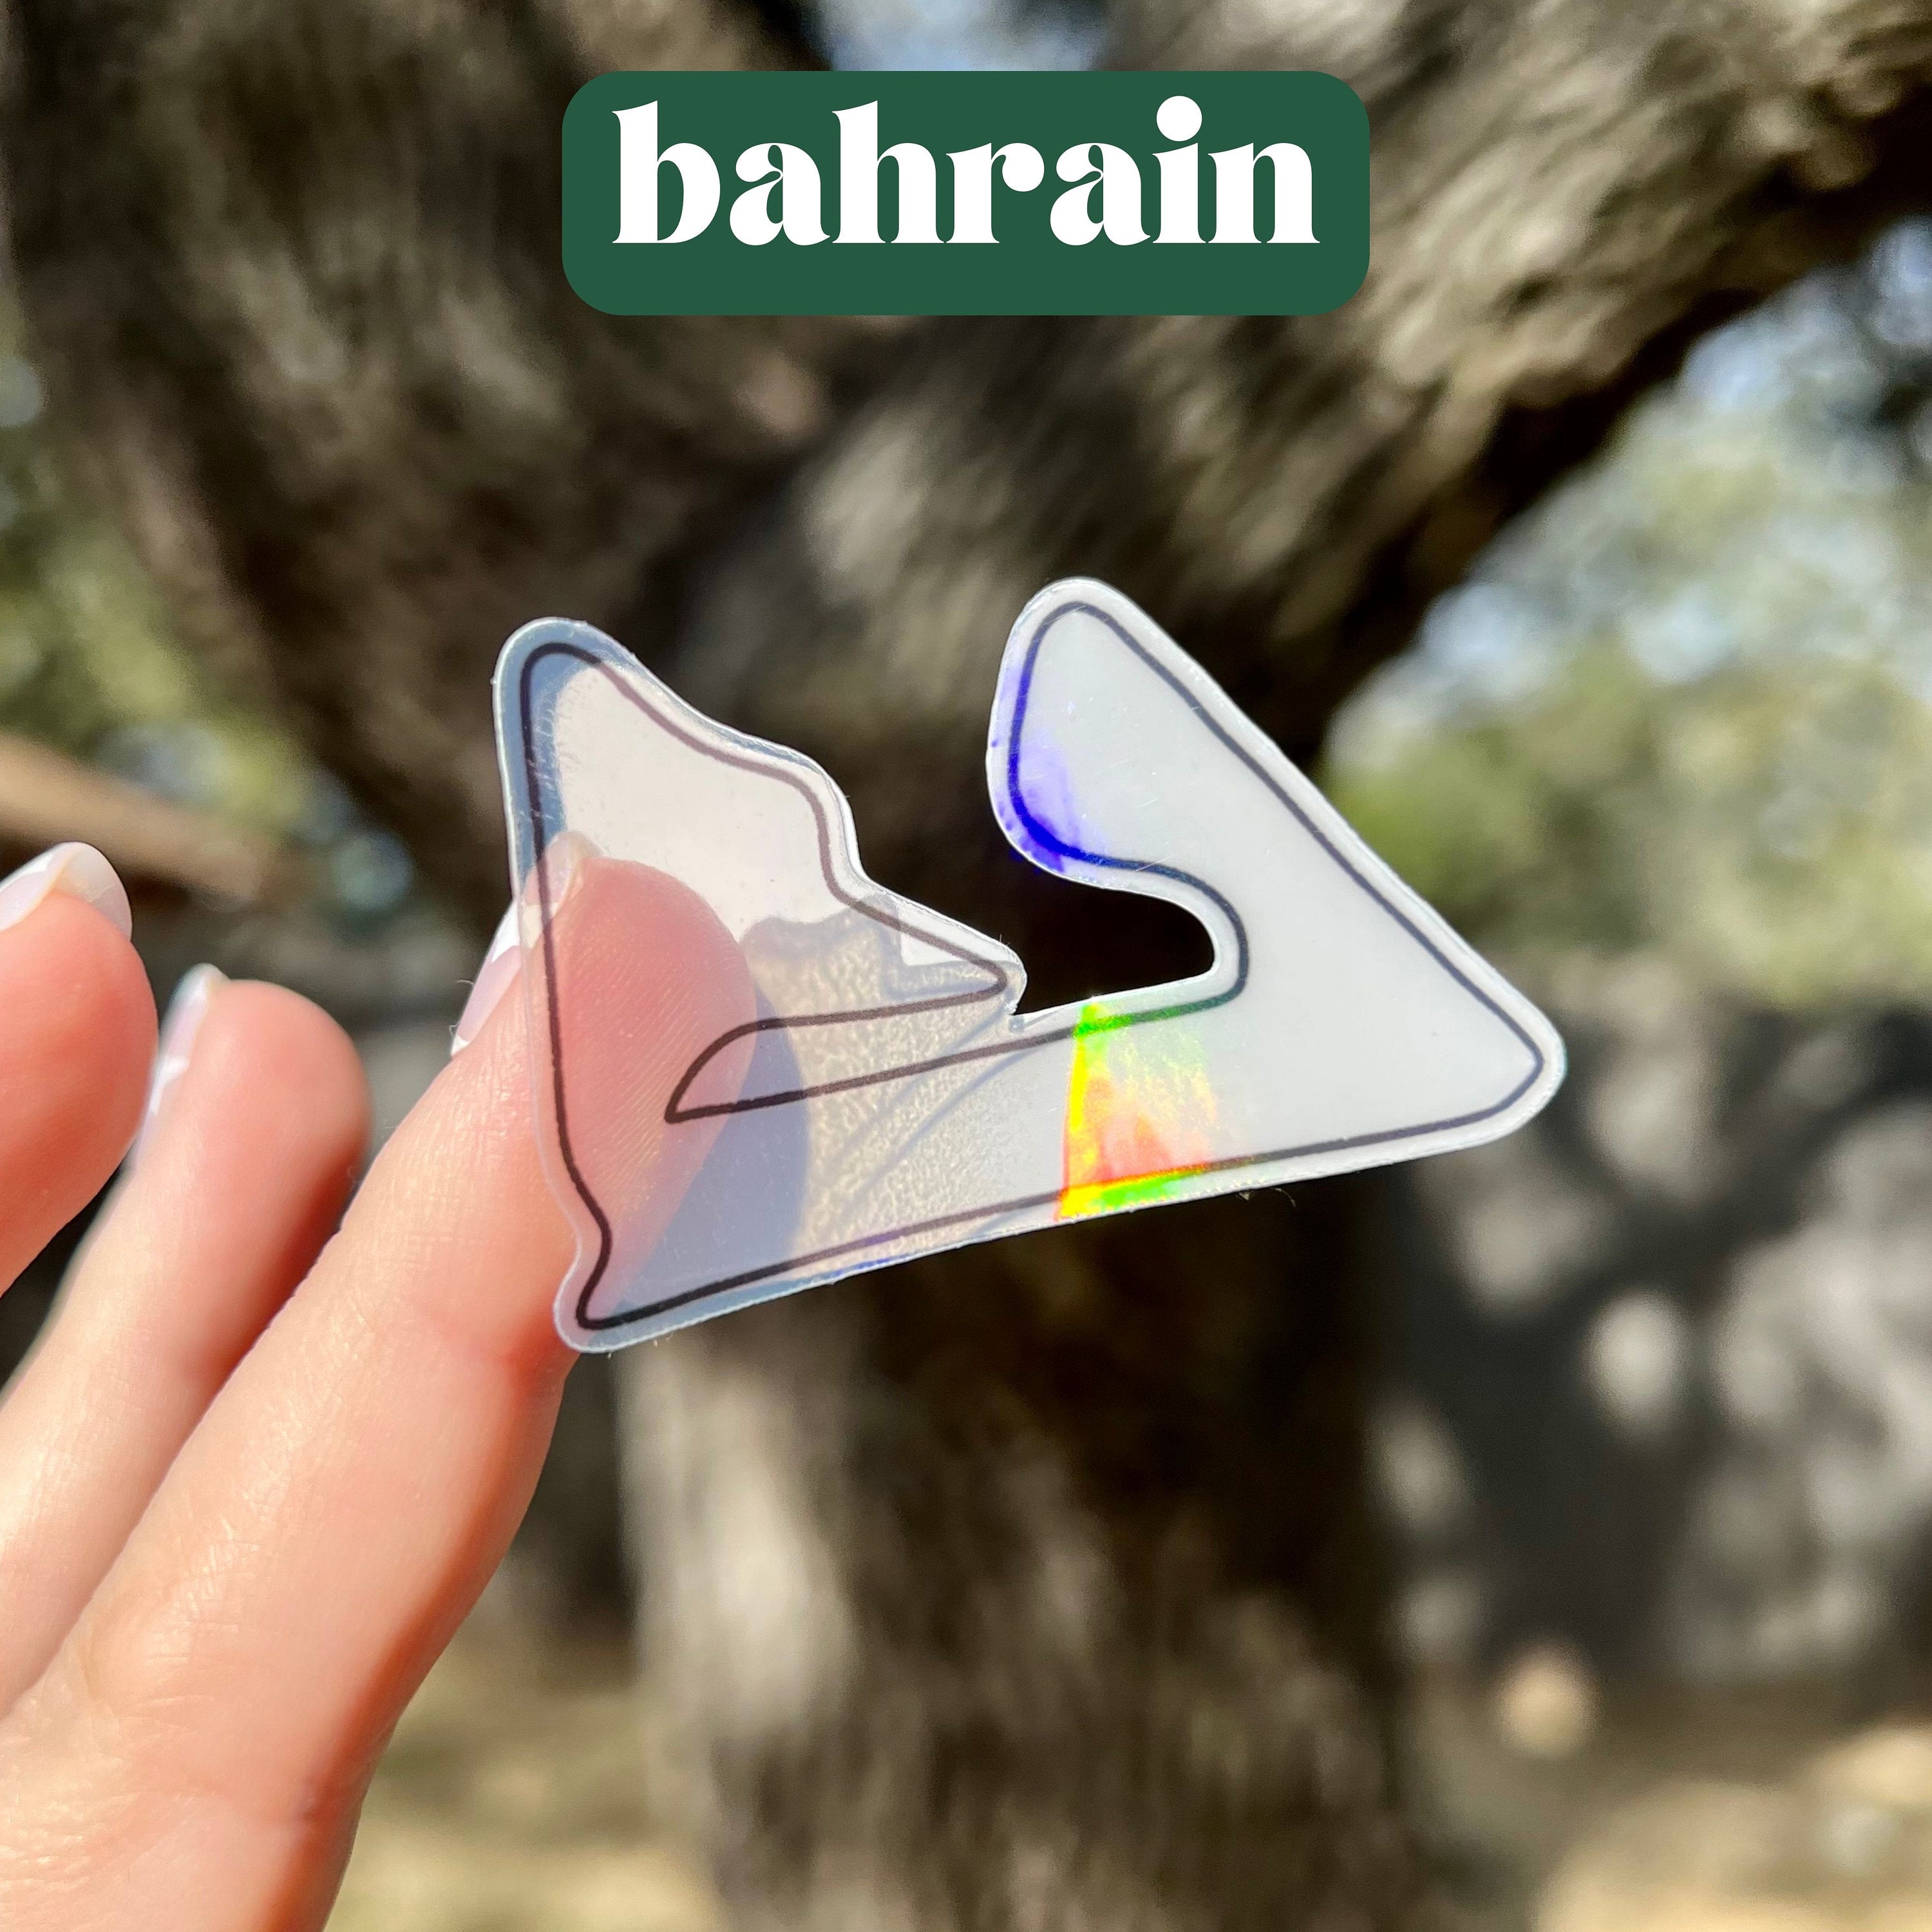 F1 holographic track stickers | clear sticker for F1 tracks | Silverstone Bahrain Spa formula one